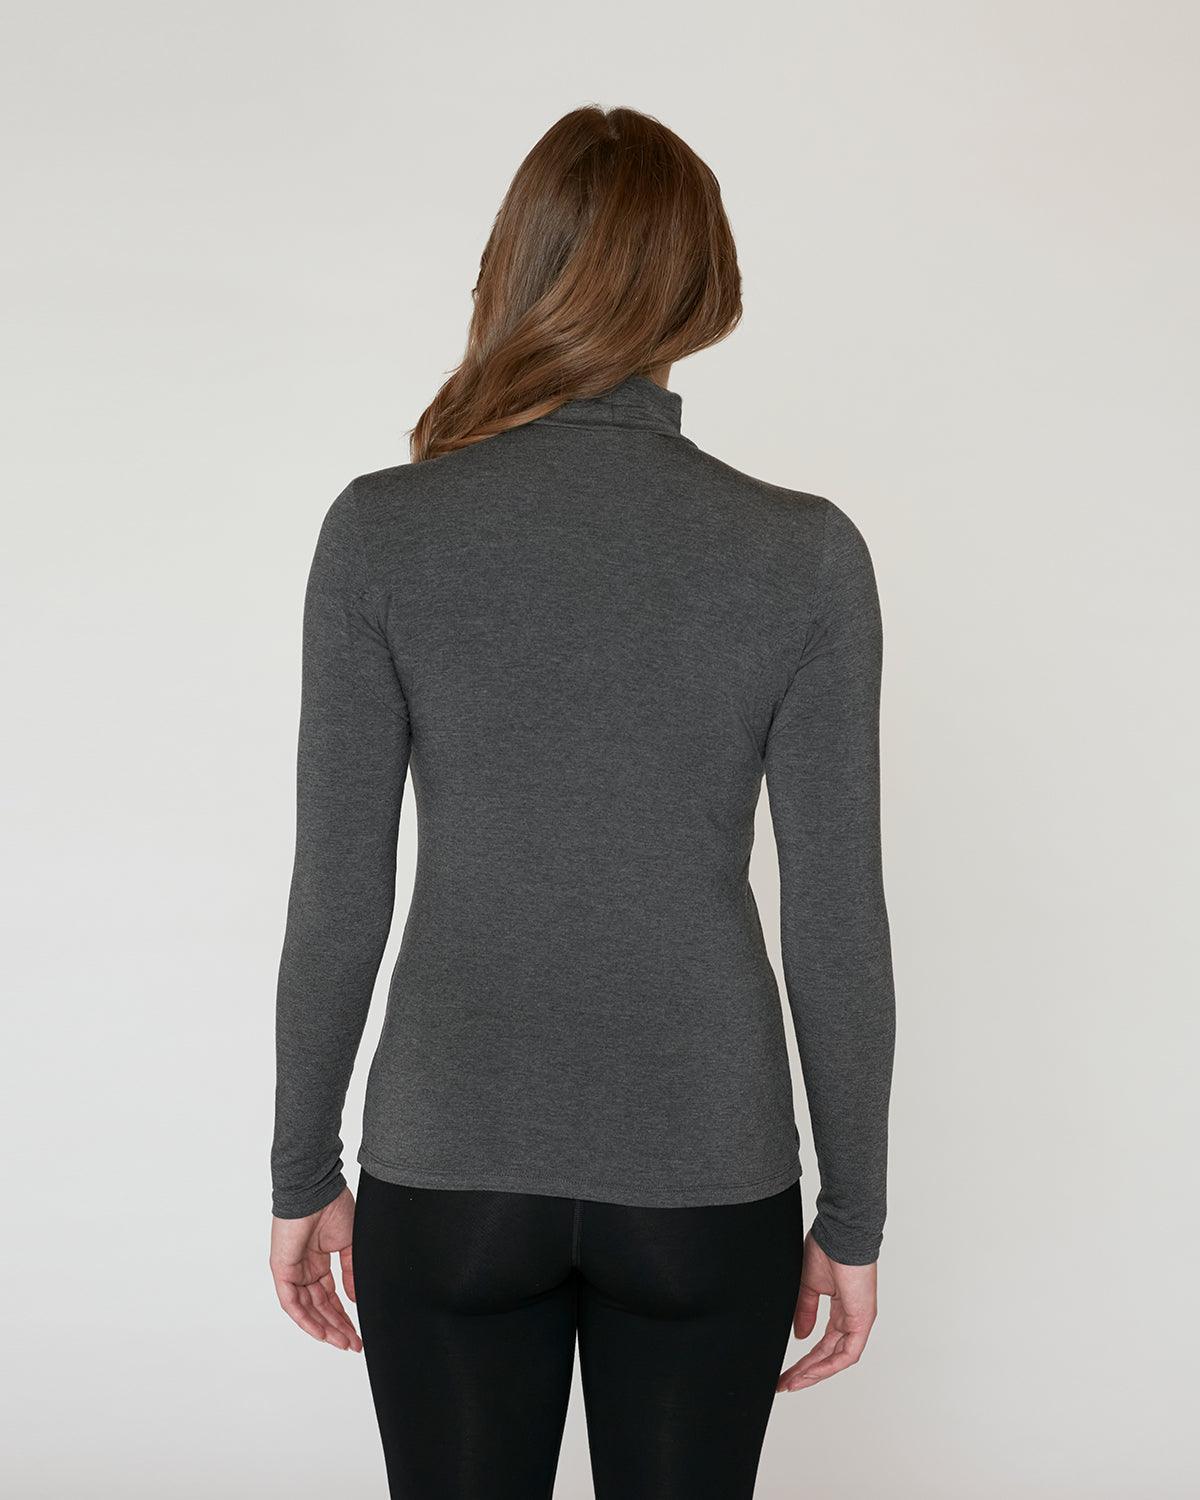 "#color_CHARCOAL| Siobhan is 5'8.5", wearing a size S